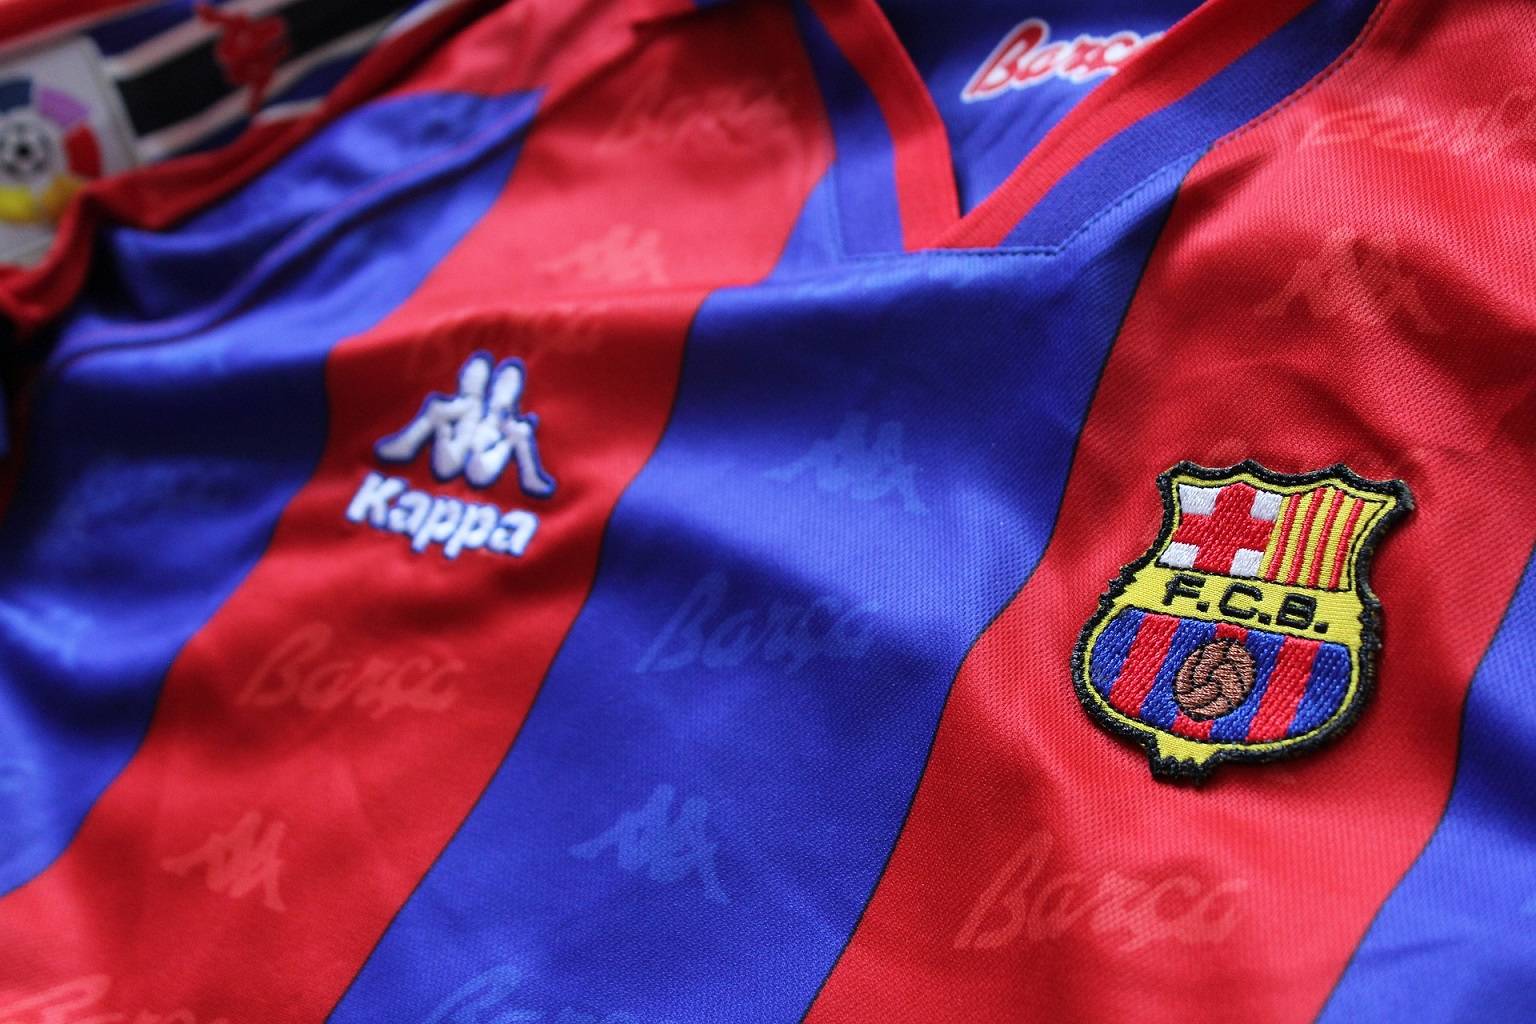 Football shirts are worn at funerals